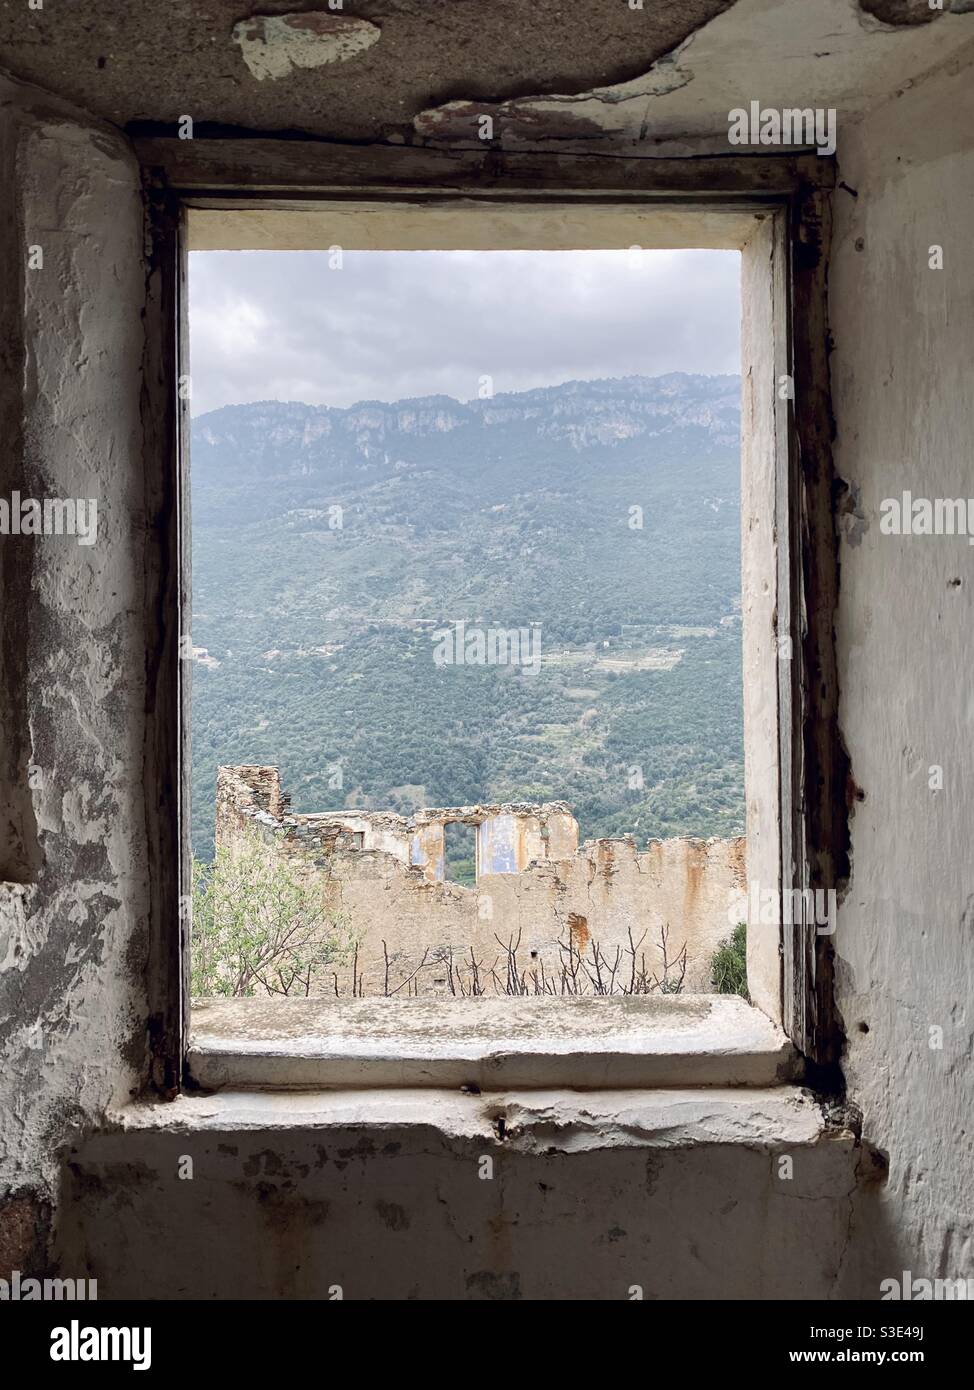 Panoramic view of an abandoned building and green mountains, known as “tacchi”, in the background, from a window of a dismissed and abandoned house of Gairo vecchio ghost town, in Sardinia, Italy. Stock Photo